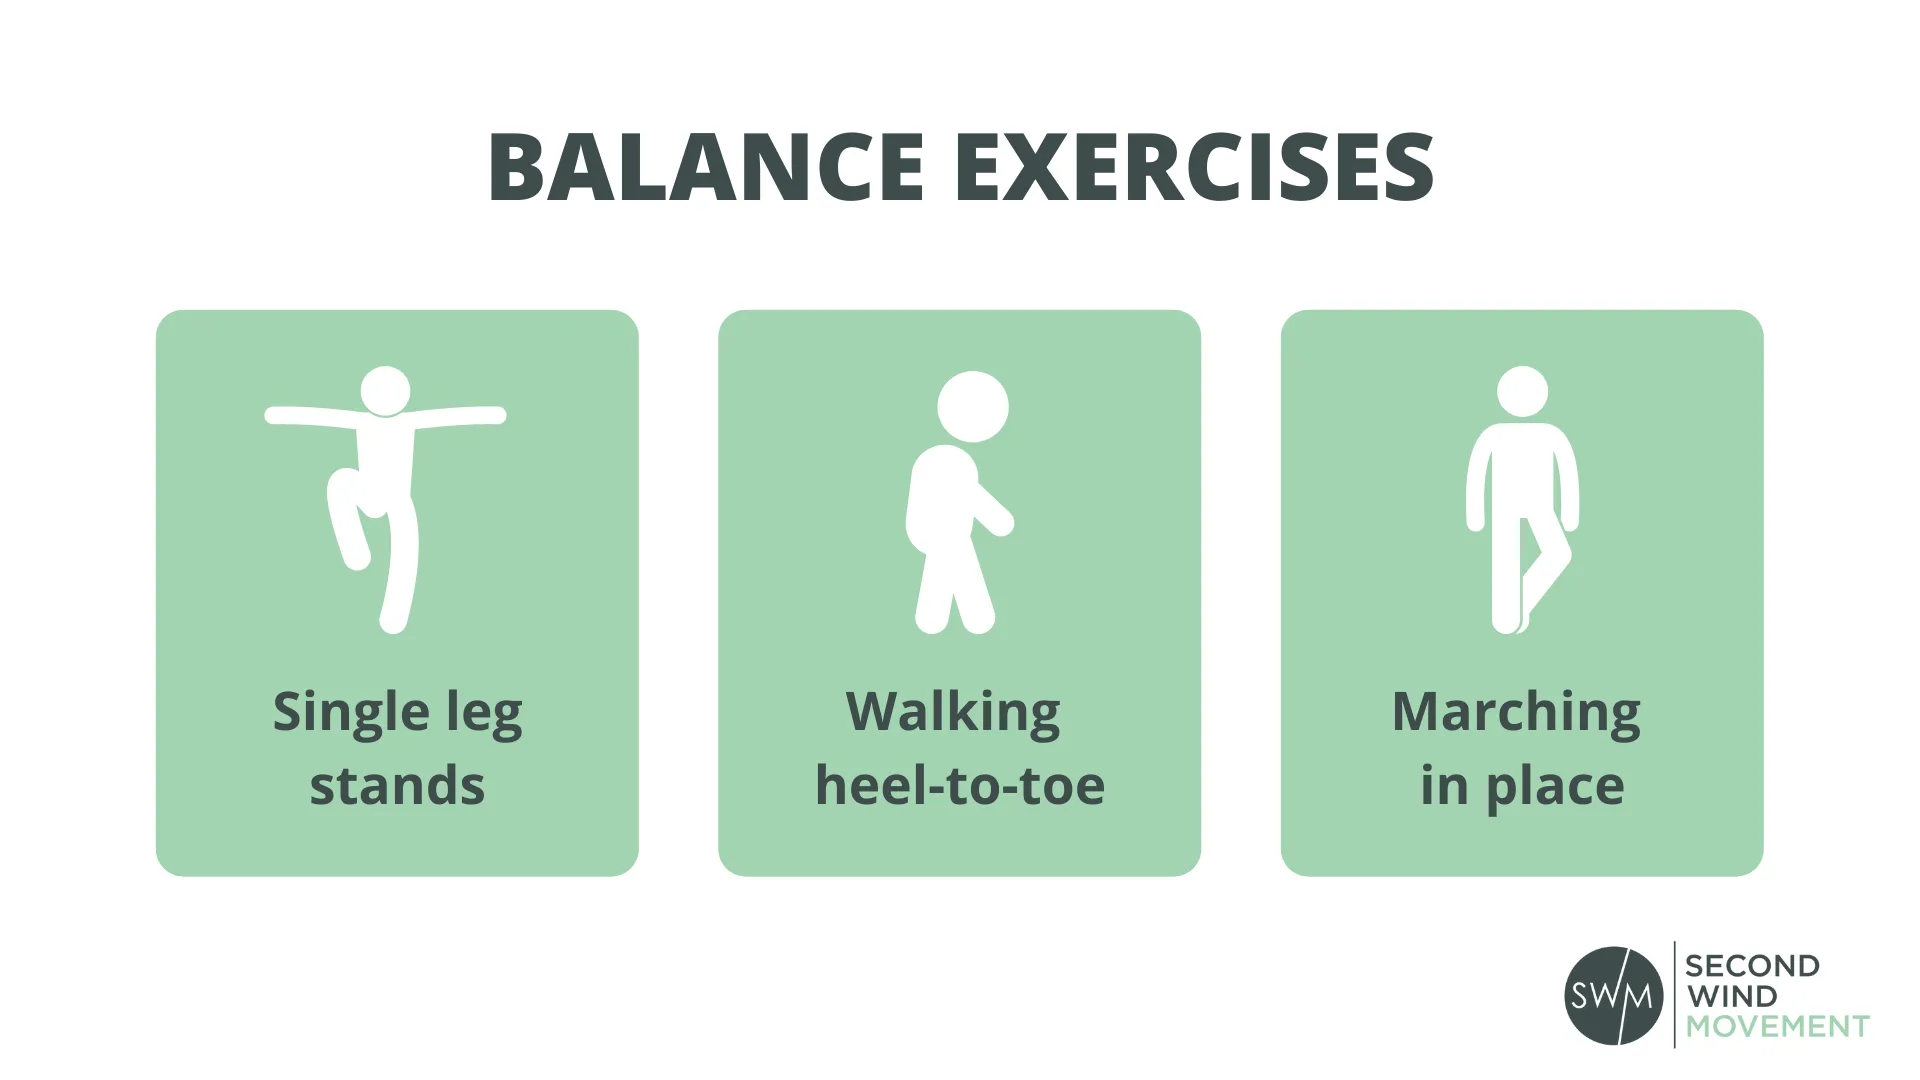 balance fall prevention exercises: single leg stand, walking heel-to-toe, marching in place